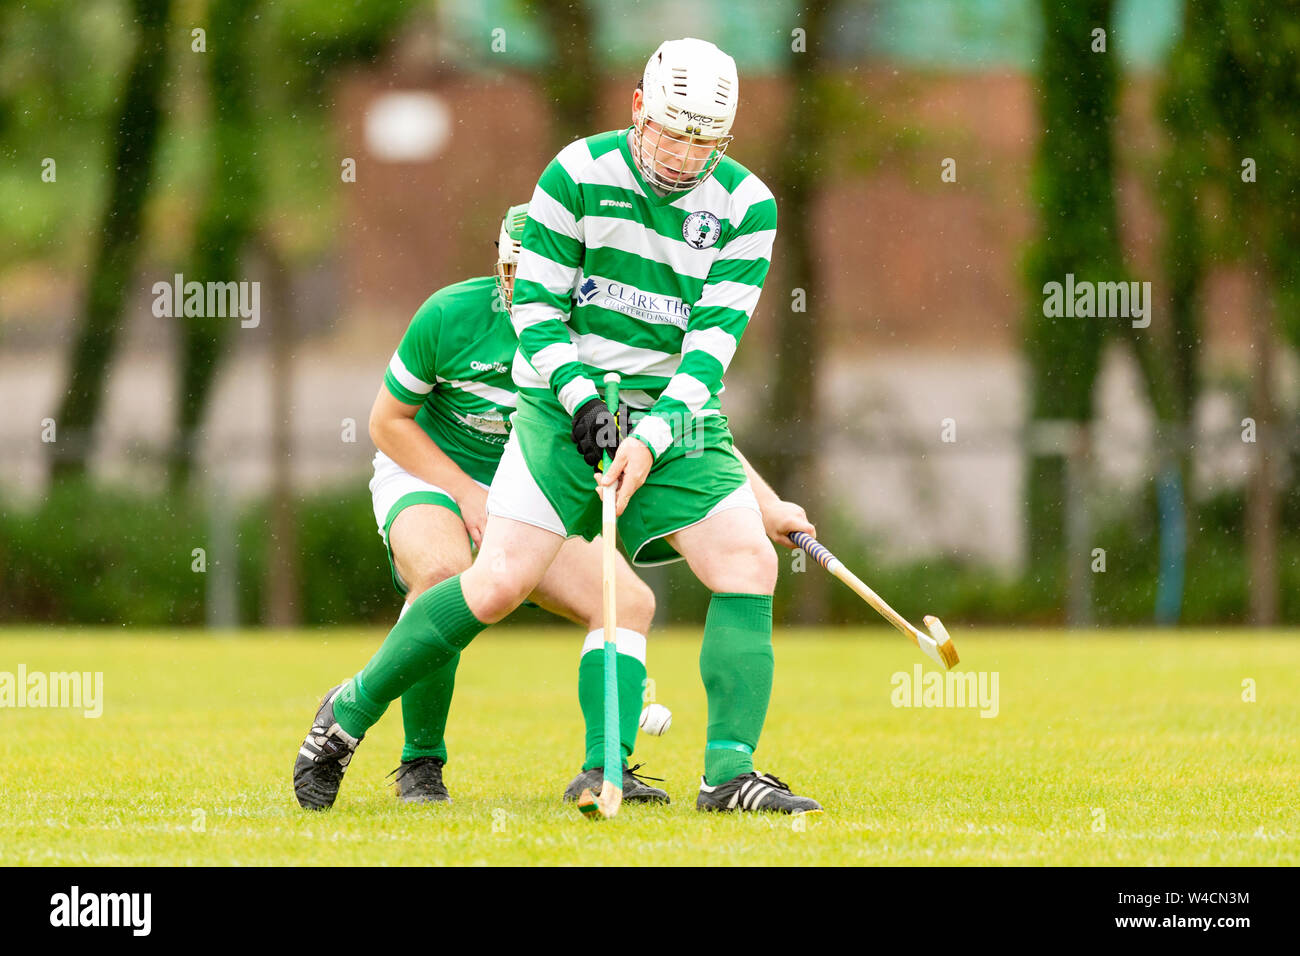 Golfer Robert MacIntyre finished 6th in his first Major, The British Open, in July 2019.  Here he is pictured playing shinty for Oban Celtic. Stock Photo